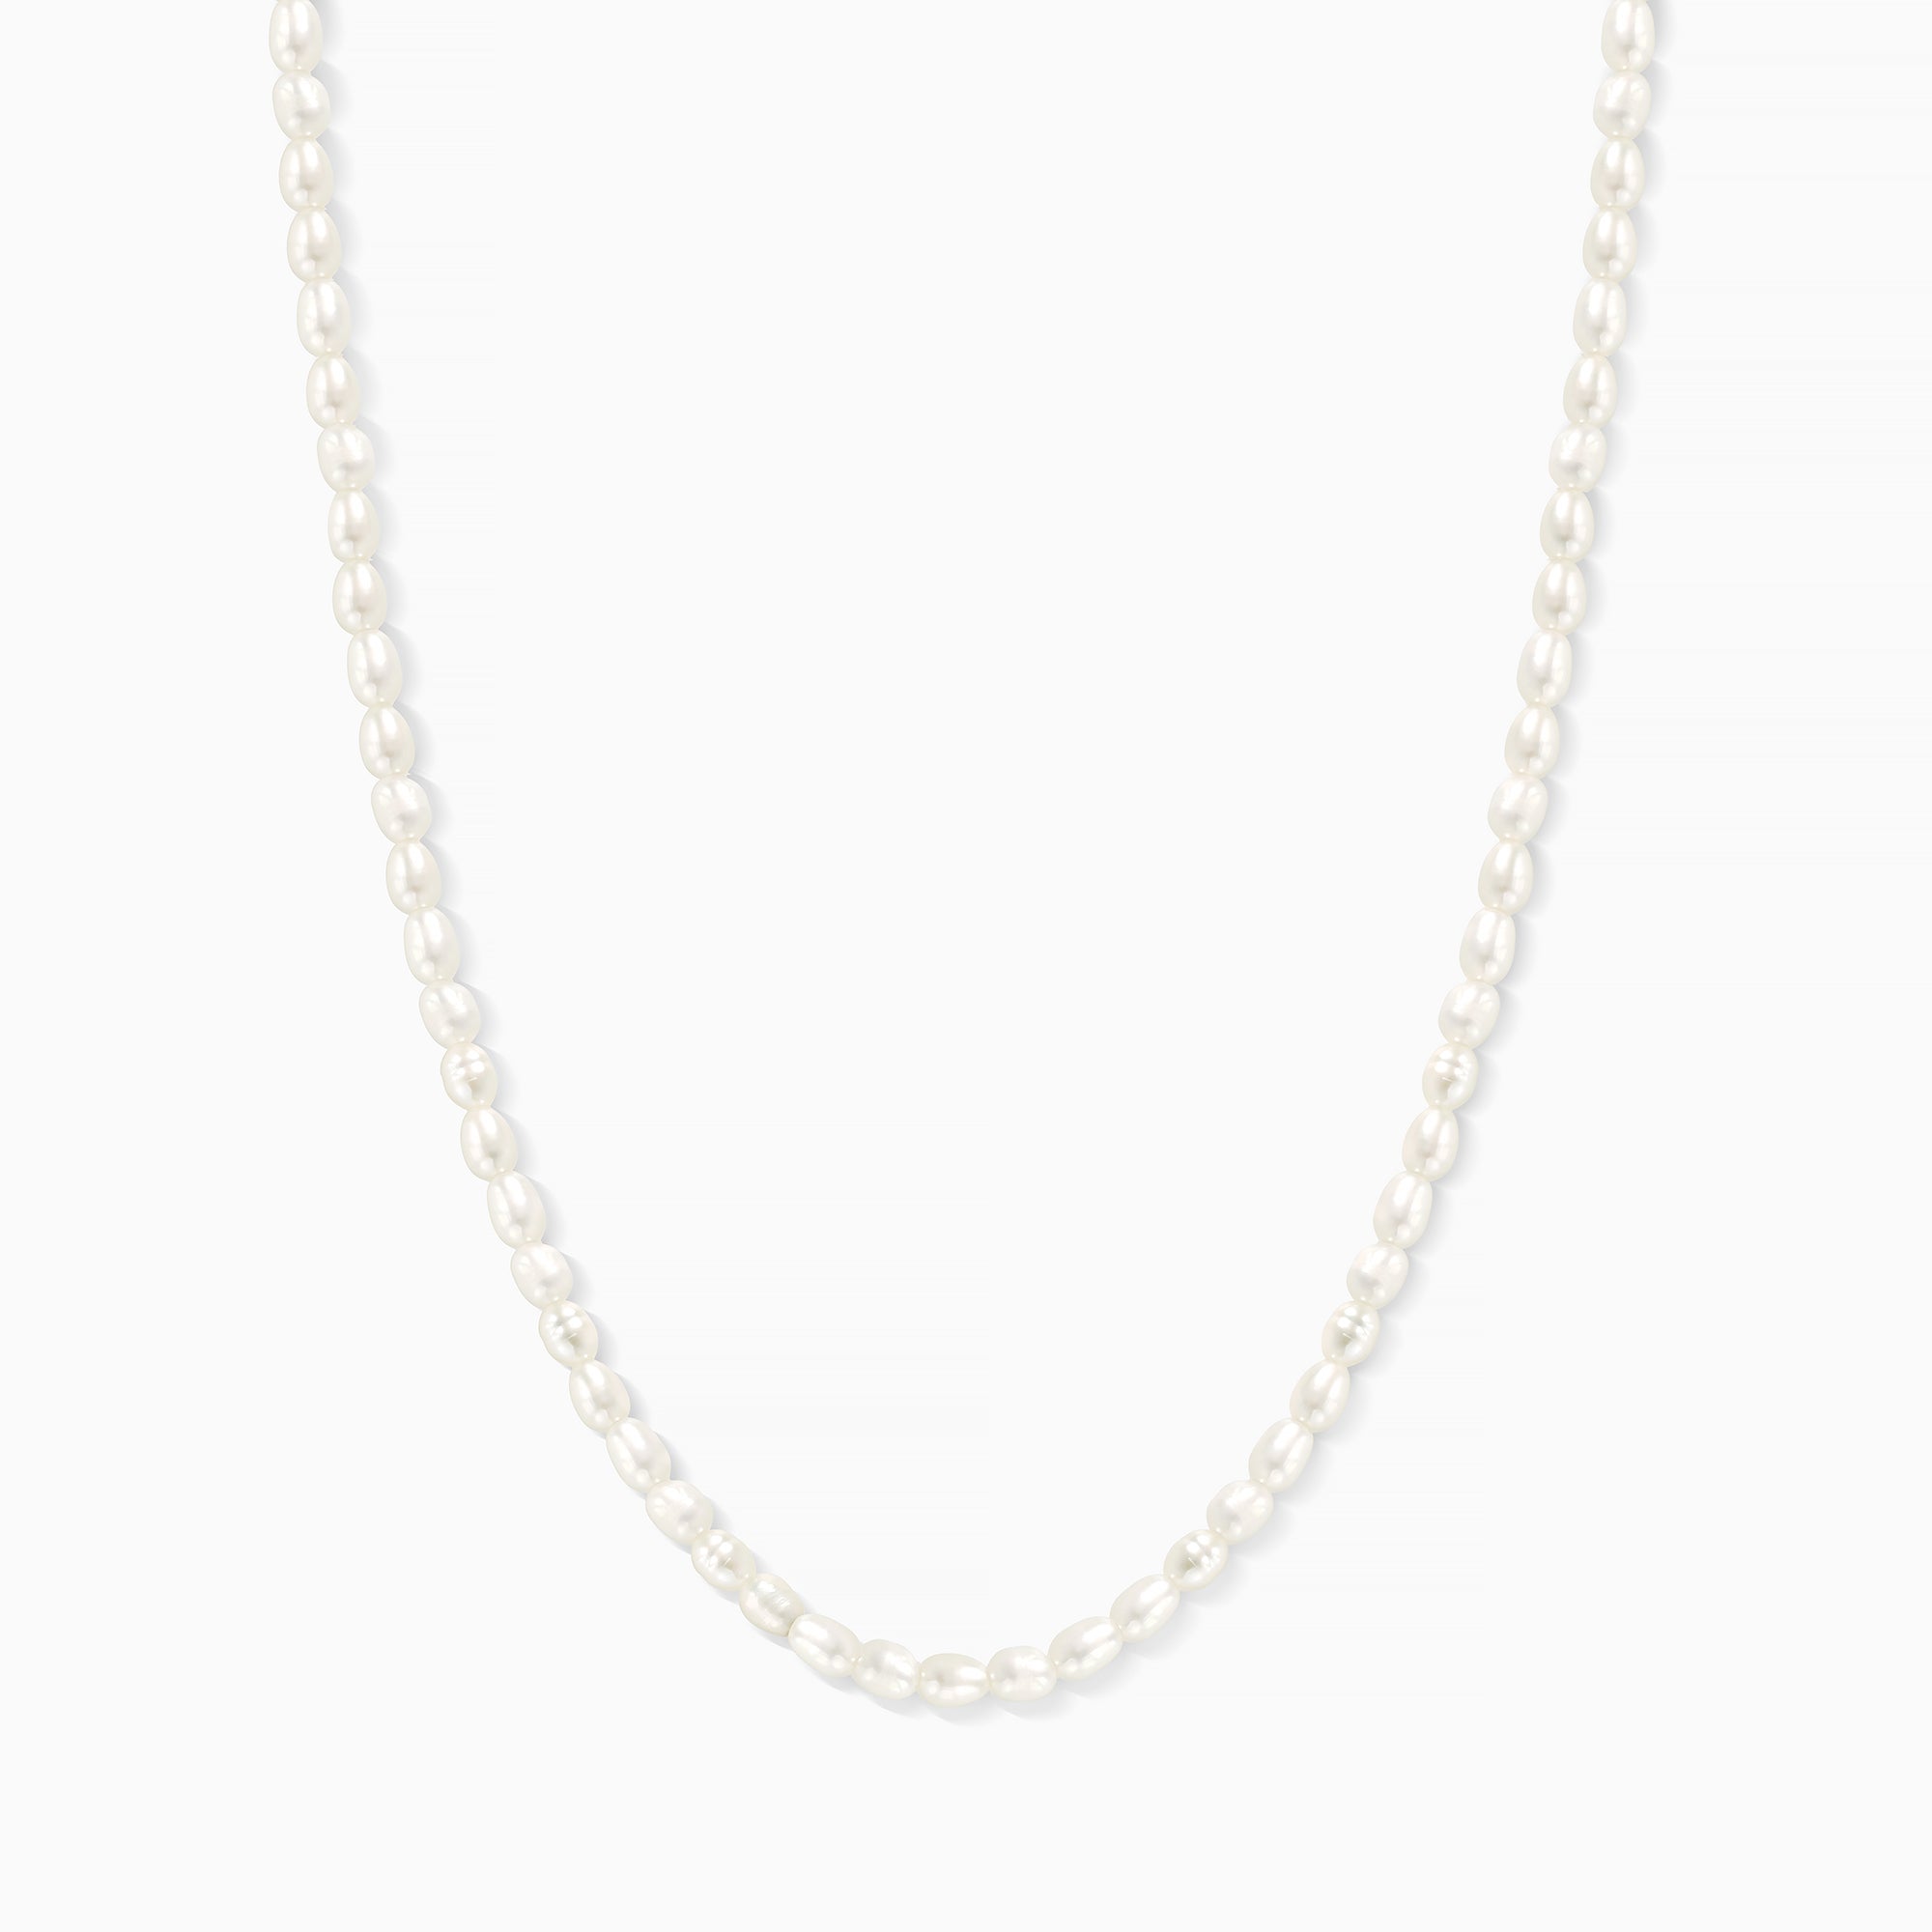 Freshwater Pearl Necklace - vanimy